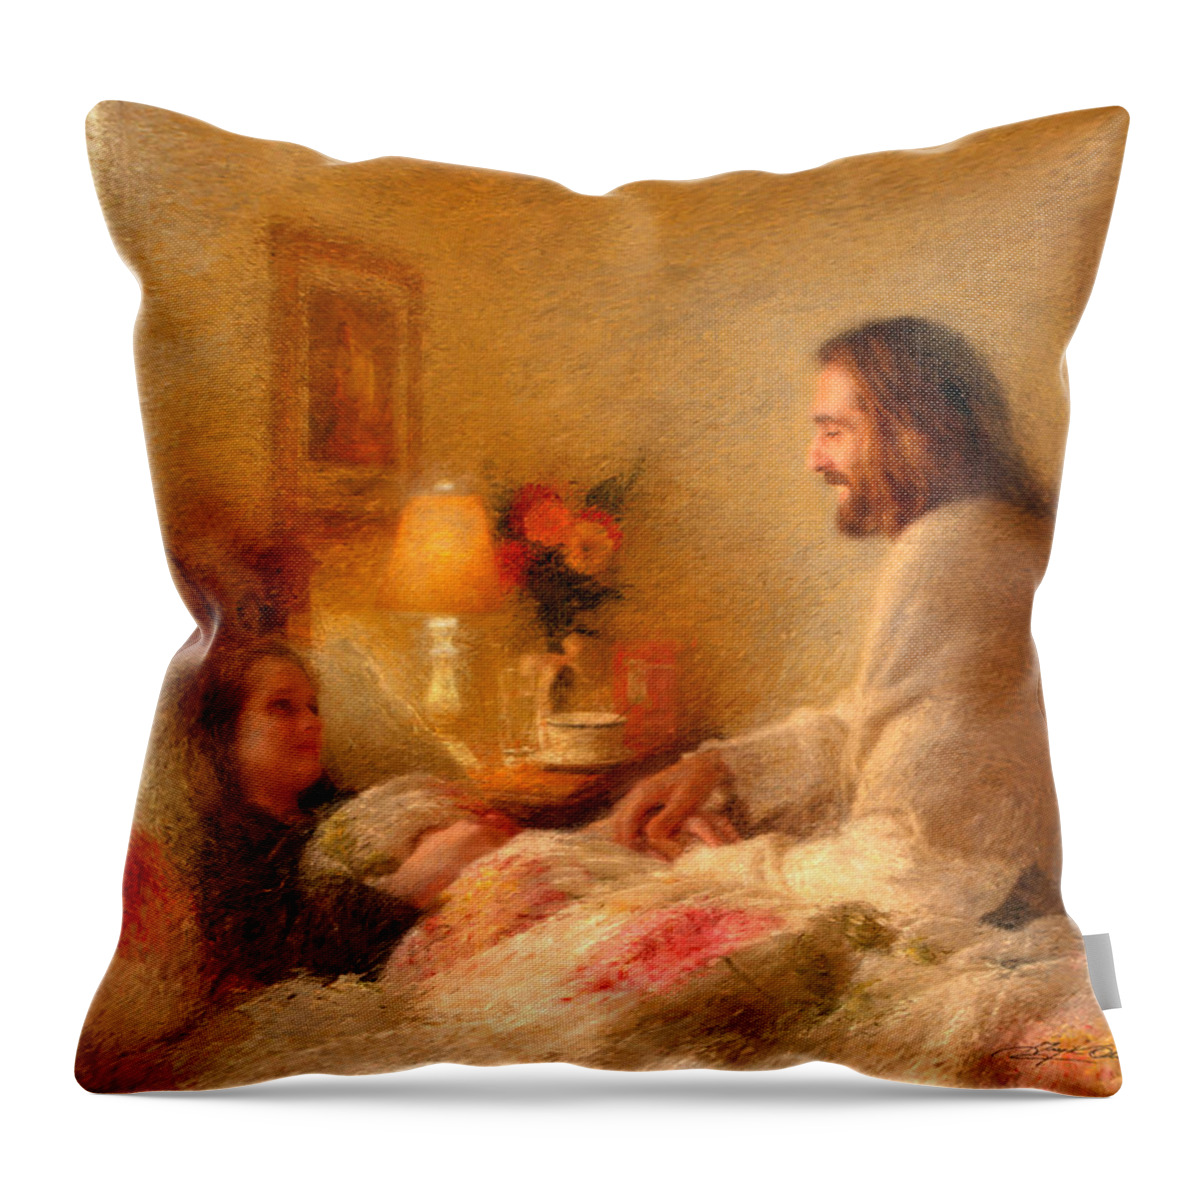 Jesus Throw Pillow featuring the painting The Comforter by Greg Olsen